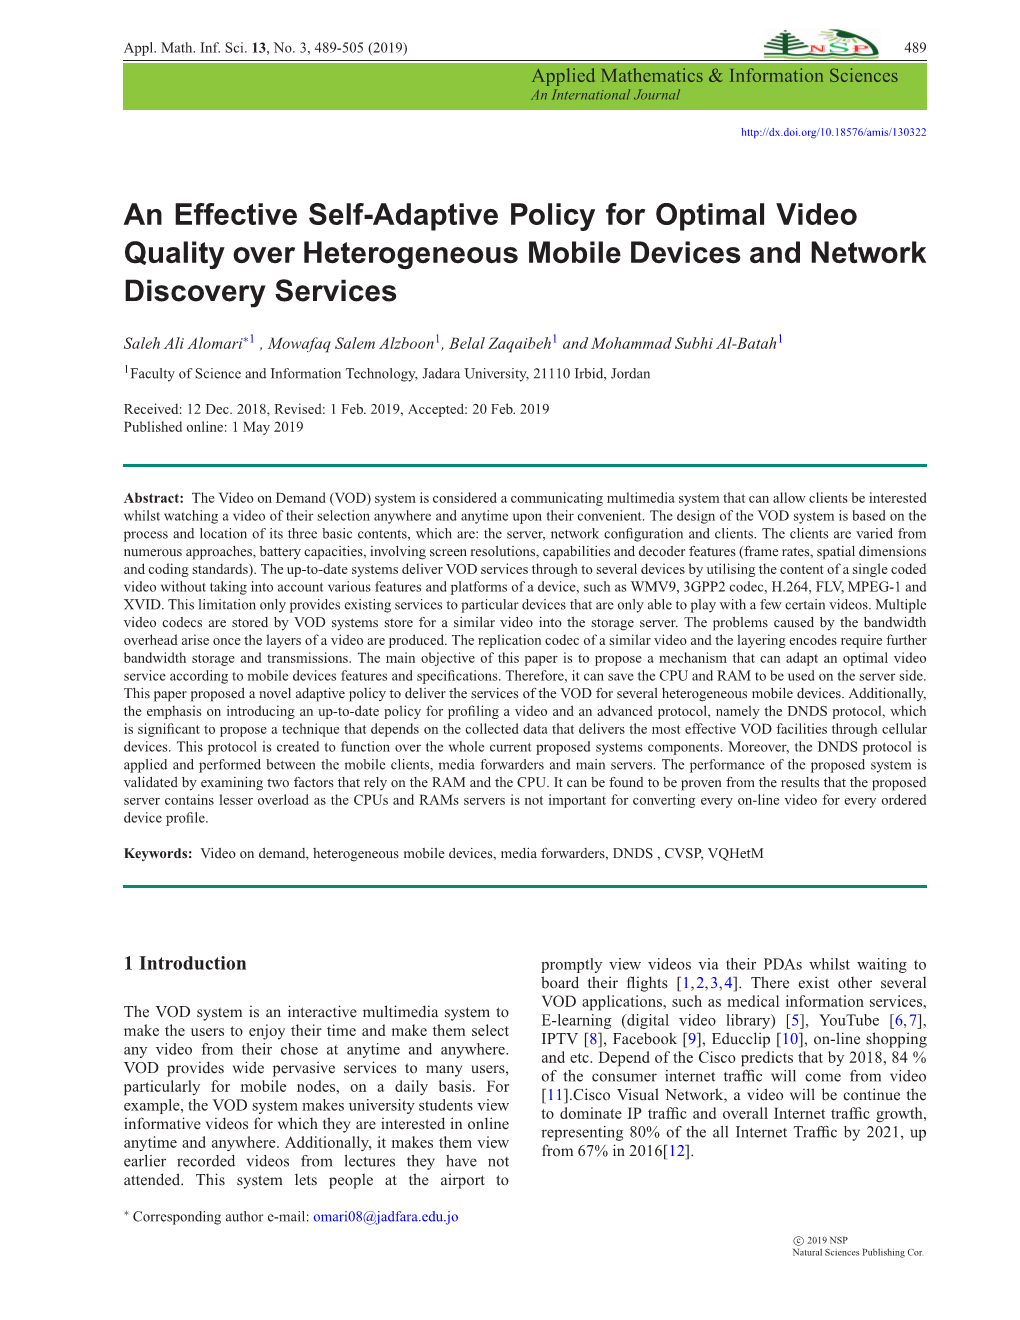 An Effective Self-Adaptive Policy for Optimal Video Quality Over Heterogeneous Mobile Devices and Network Discovery Services